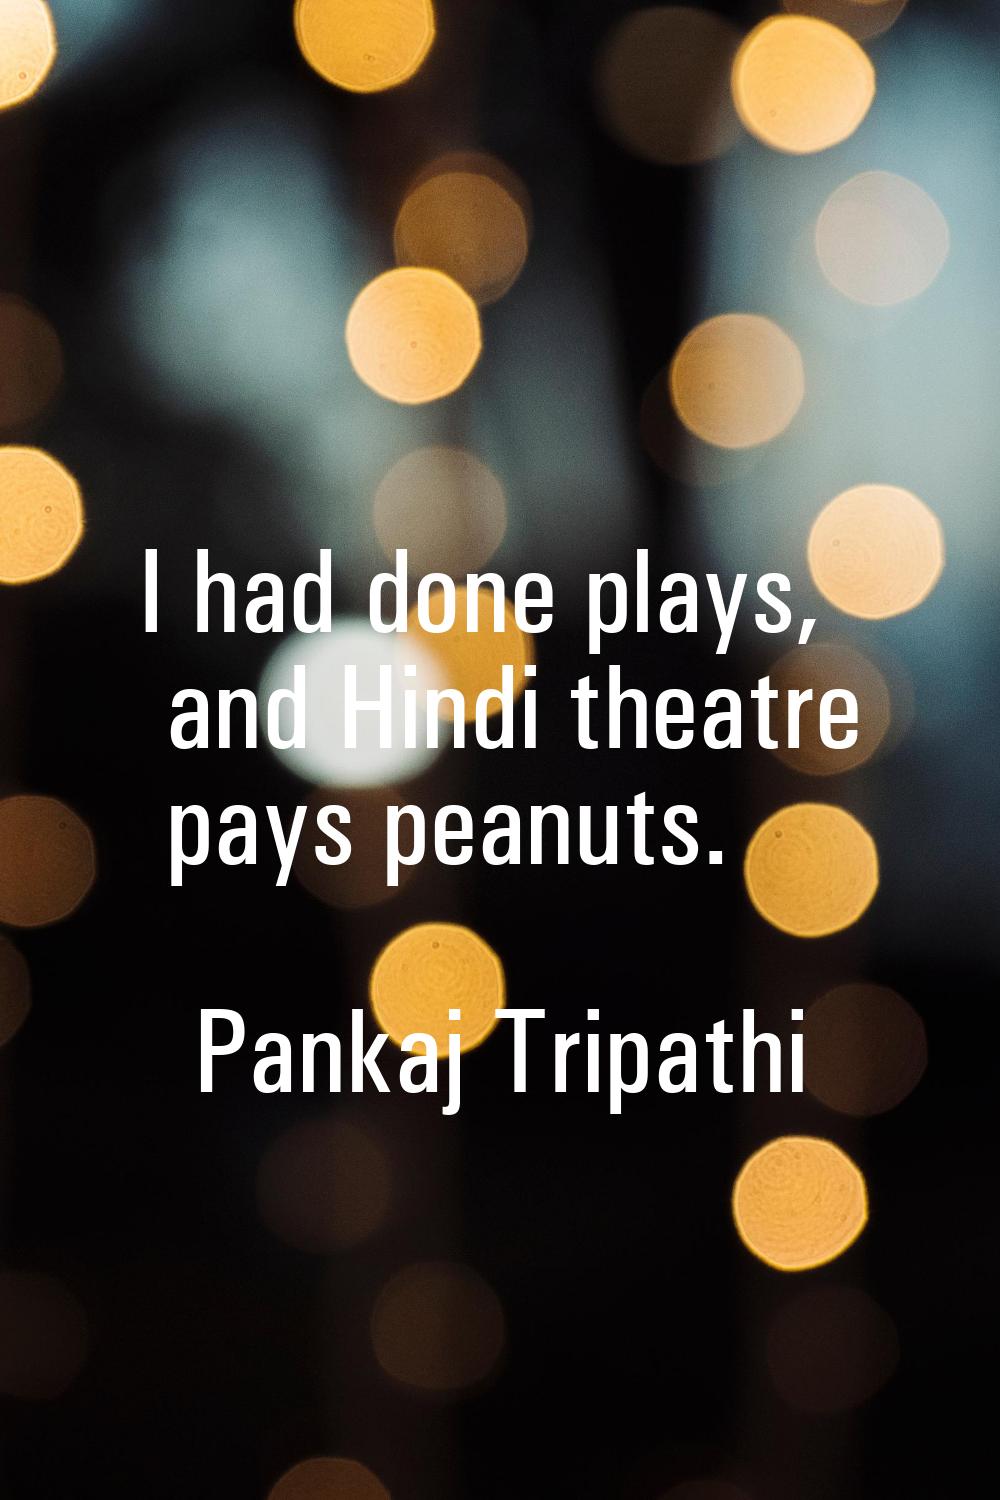 I had done plays, and Hindi theatre pays peanuts.